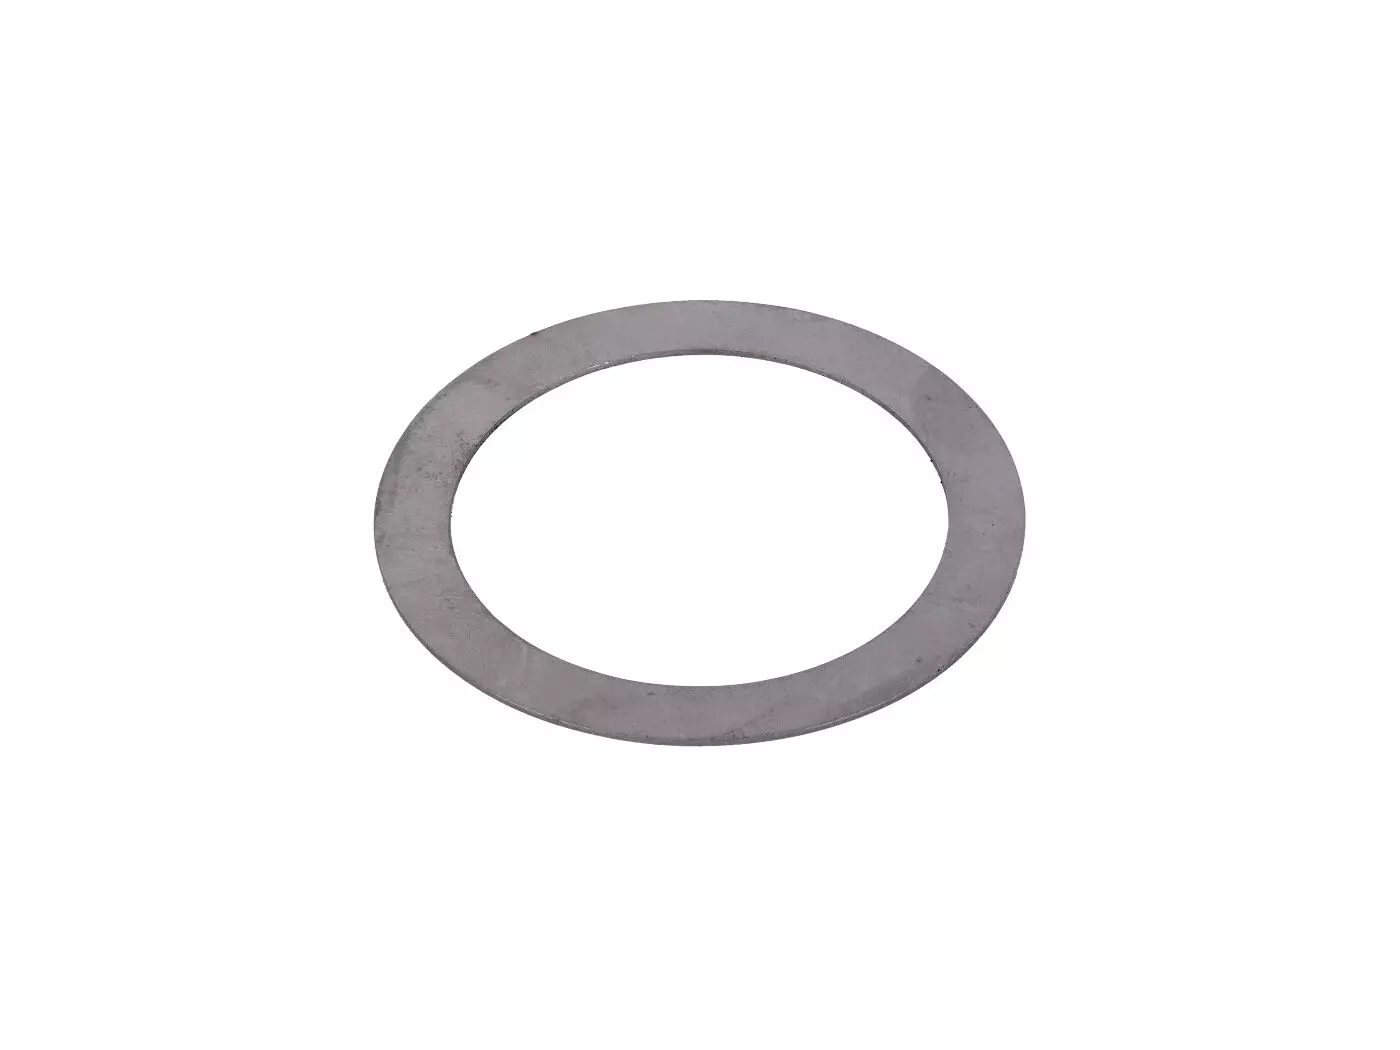 Drive Shaft Sealing Cap Spacer Disc 32x42x0.5mm For Simson S50, S51, S53, S70, S83, SR50, SR80, KR51, KR51/1, KR51/2, SR4-1, SR4-2, SR4-3, SR4-4